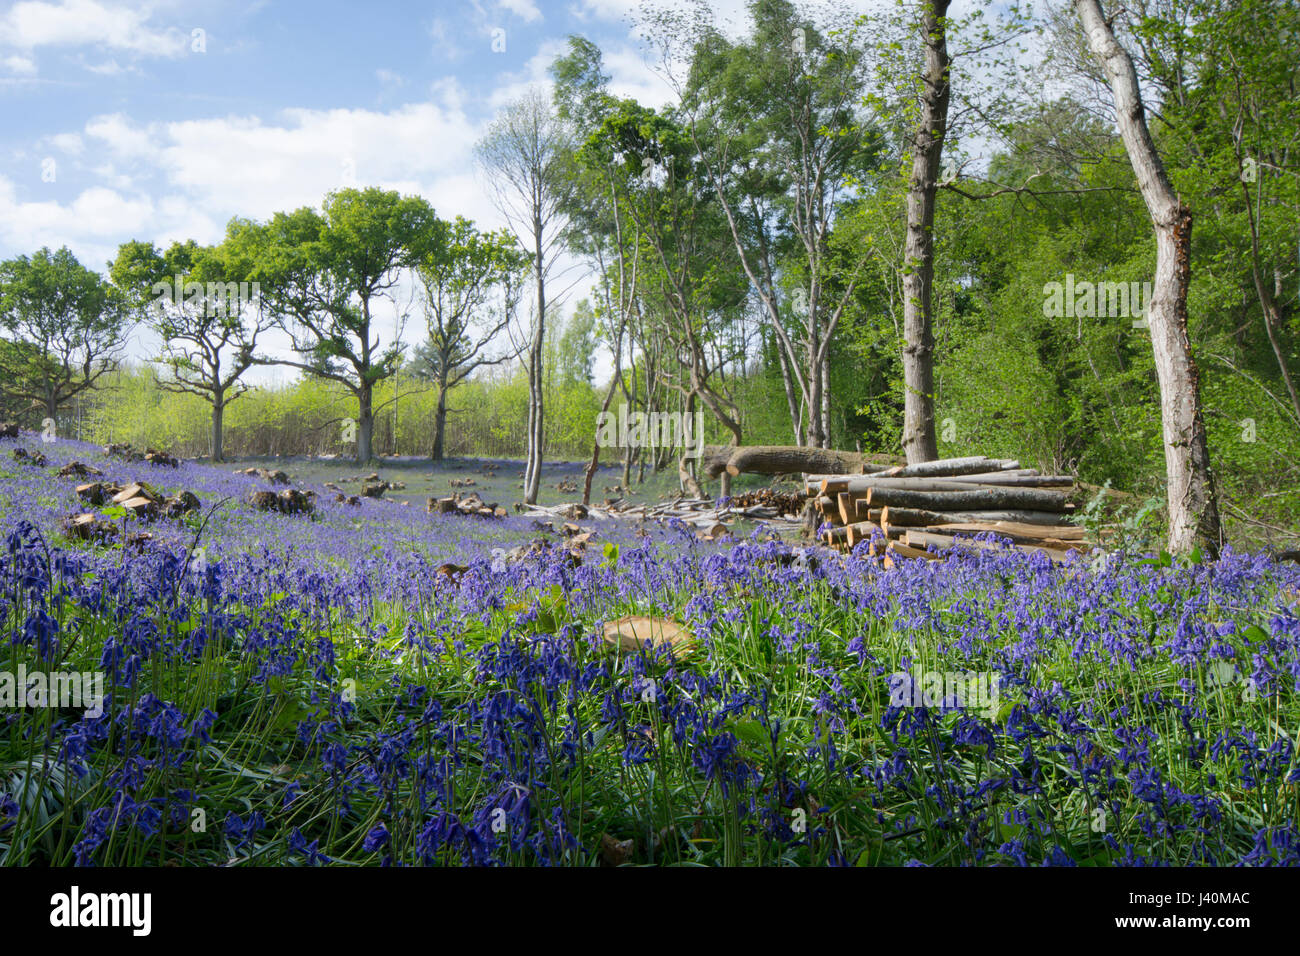 Bluebells, Hyacinthoides non-scripta, in cut Sweet Chestnut coppice. Near Midhurst, West Sussex, UK. May. Stock Photo